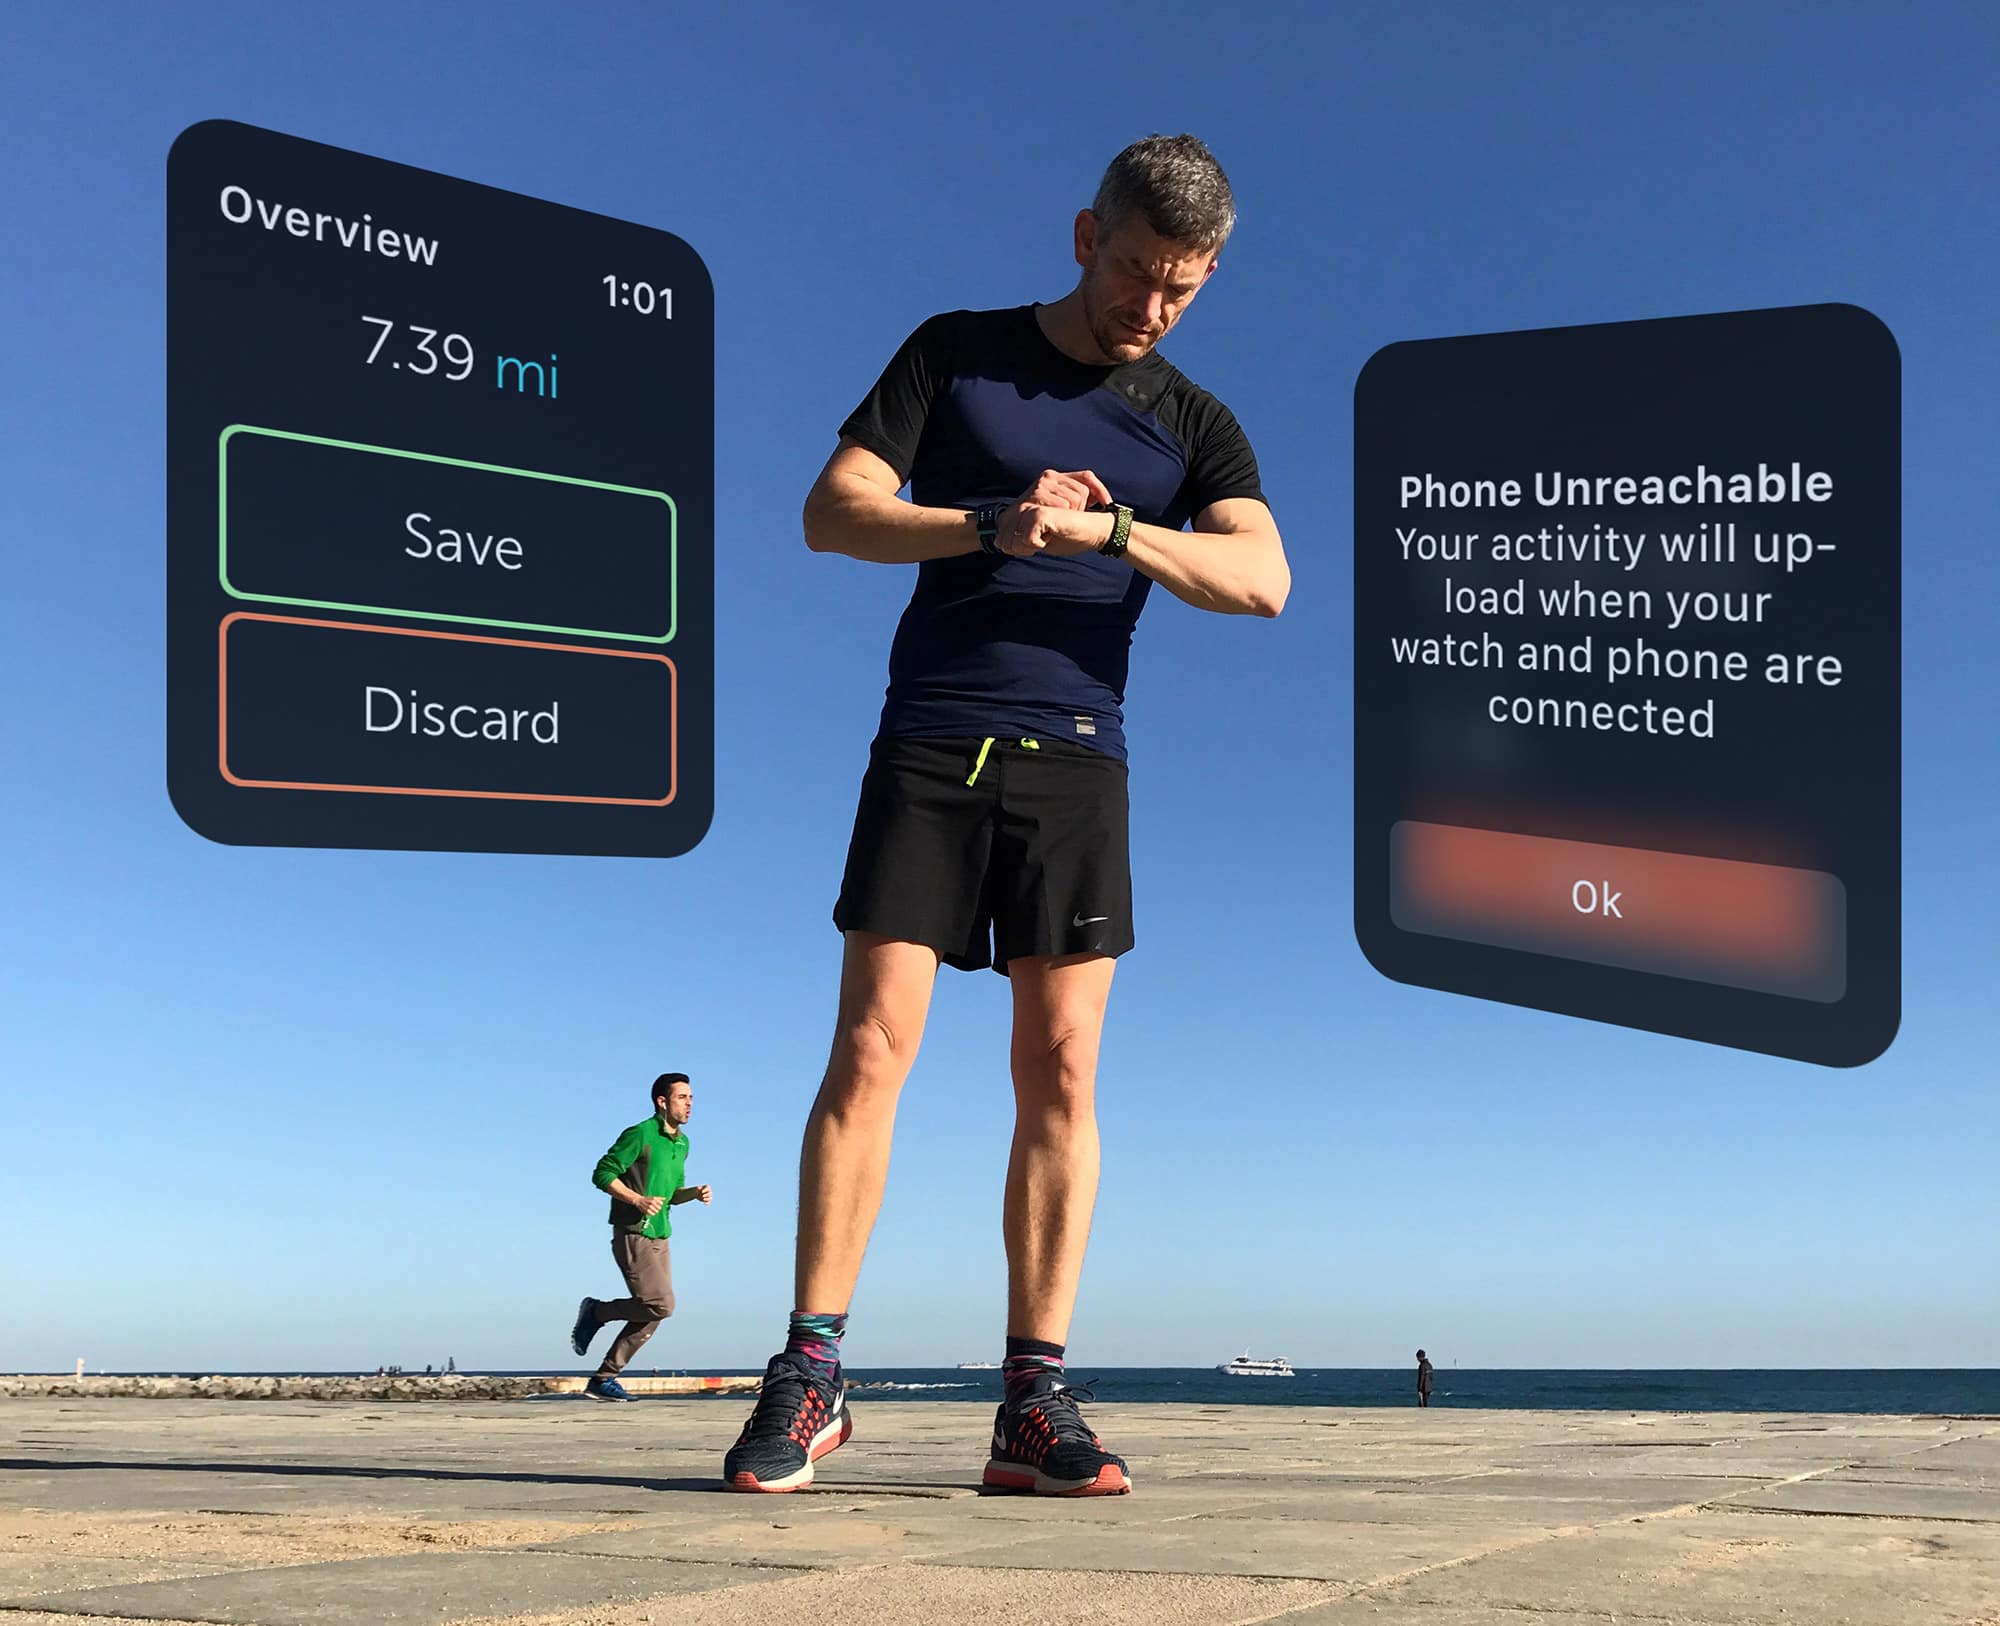 Here's how Apple could improve watchOS 4 for fitness buffs.